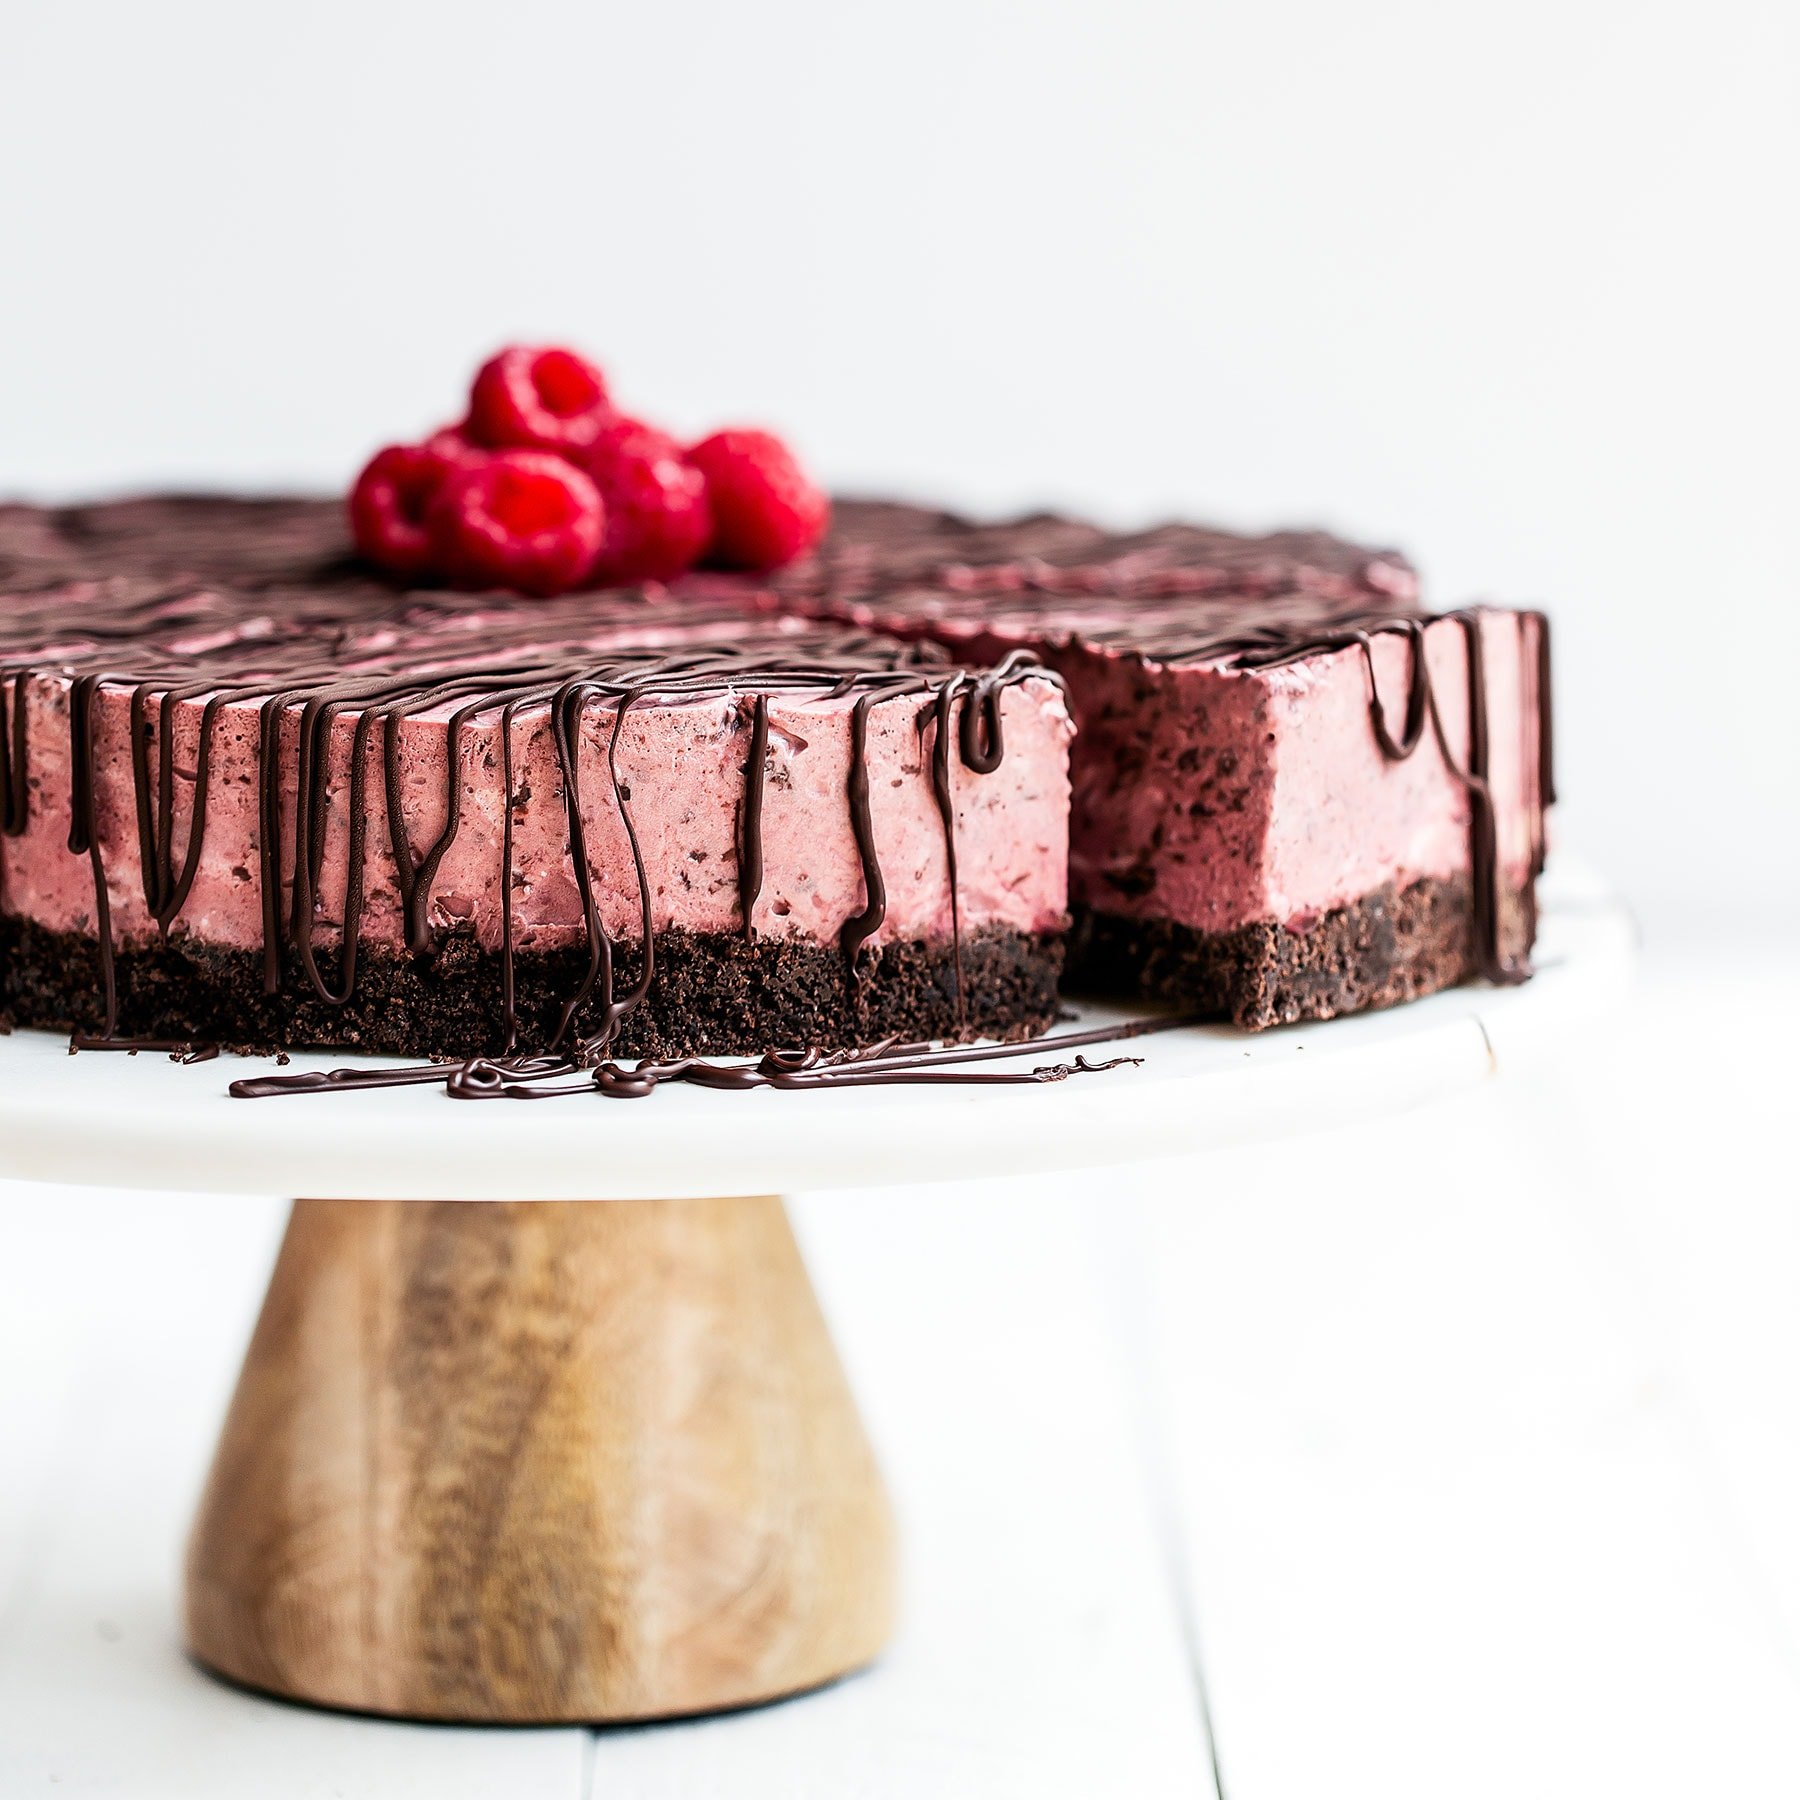 No Bake Frozen Chocolate Raspberry Pie features a chocolate graham cracker crust, creamy chocolate raspberry filling, and is topped with more chocolate! Perfect refreshing summer treat.